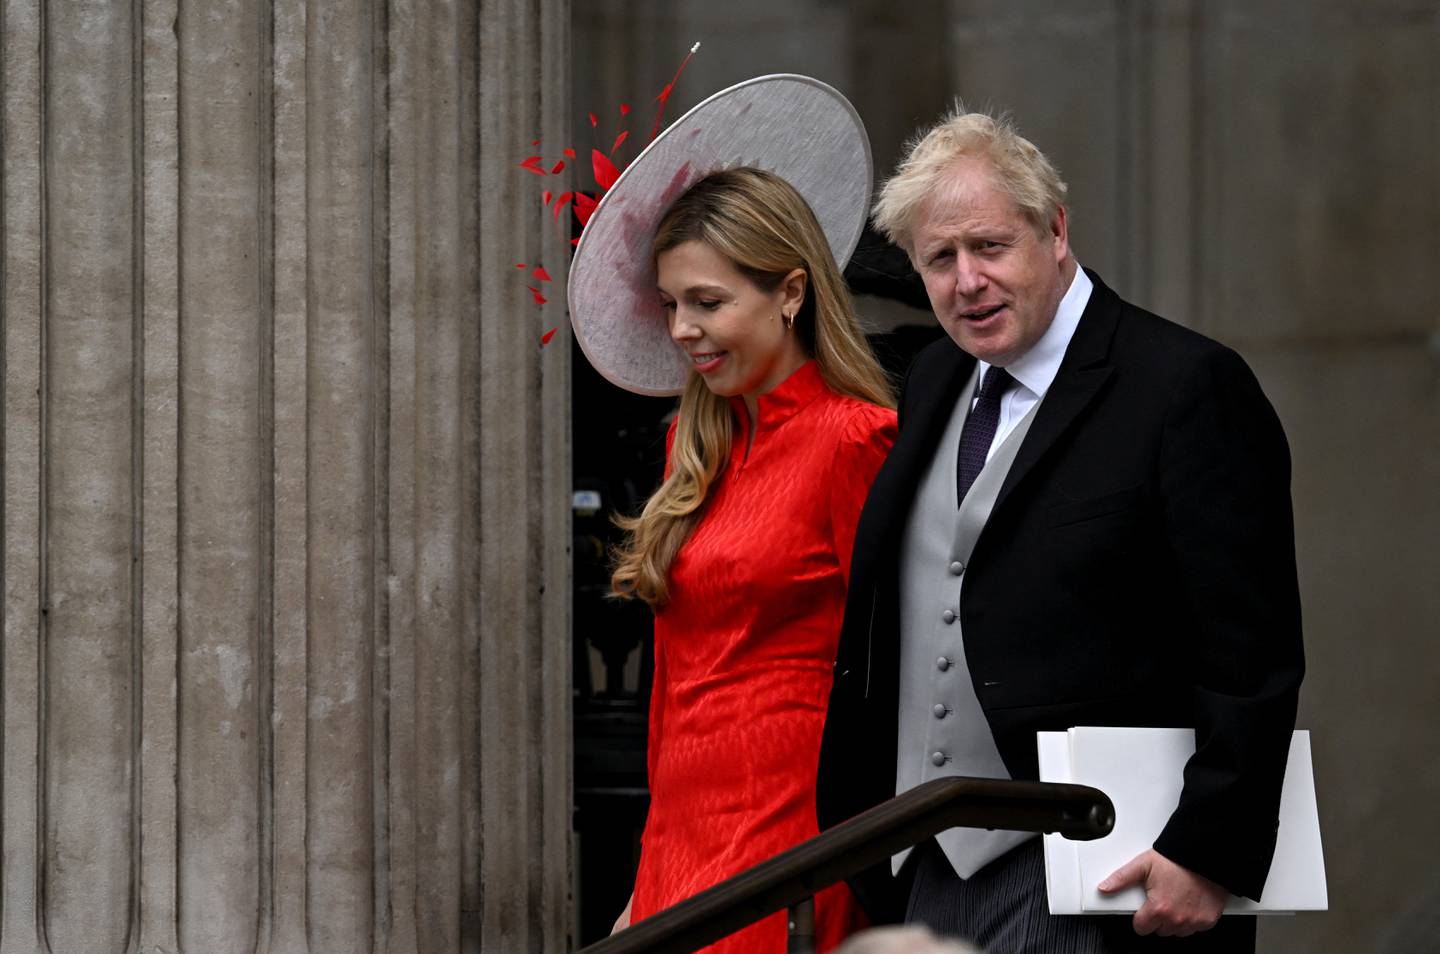 UK Prime Minister Boris Johnson and his wife, Carrie, at St Paul's Cathedral for Queen Elizabeth's jubilee celebrations. Mr Johnson was booed while entering the church. Reuters 

